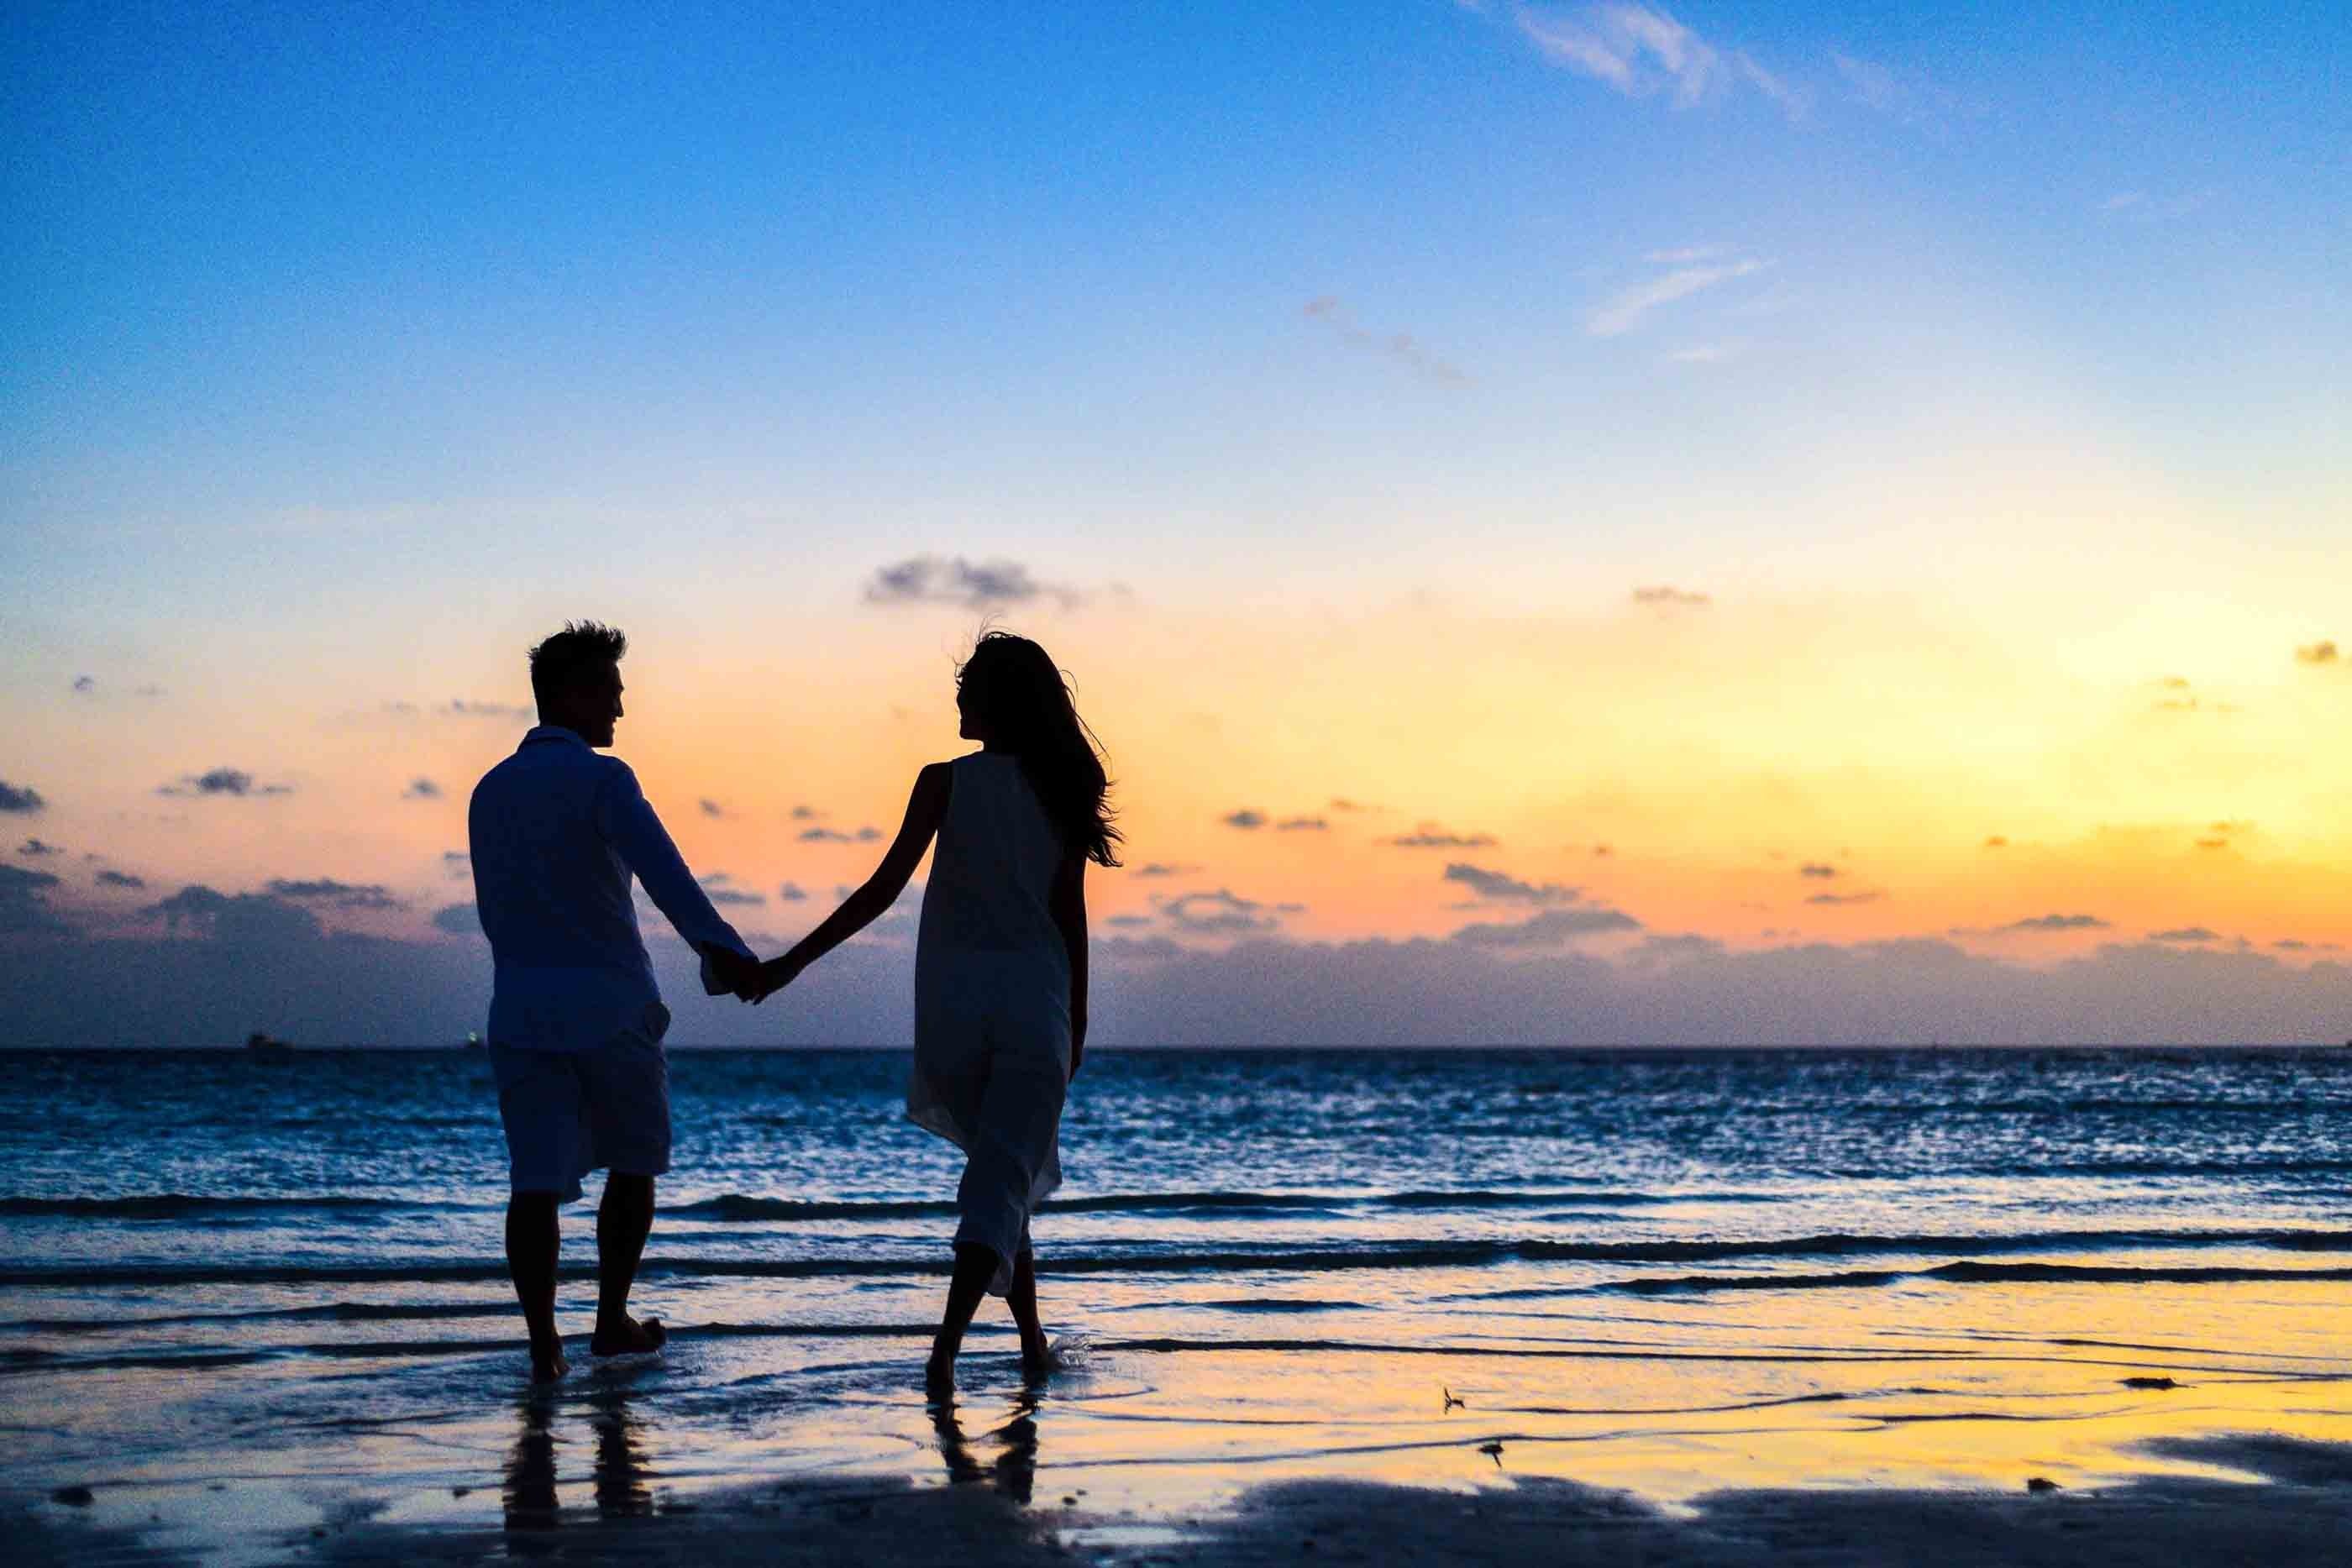 Pictured - A man and a woman holding hands on seashore during sunrise | Source: Pexels 